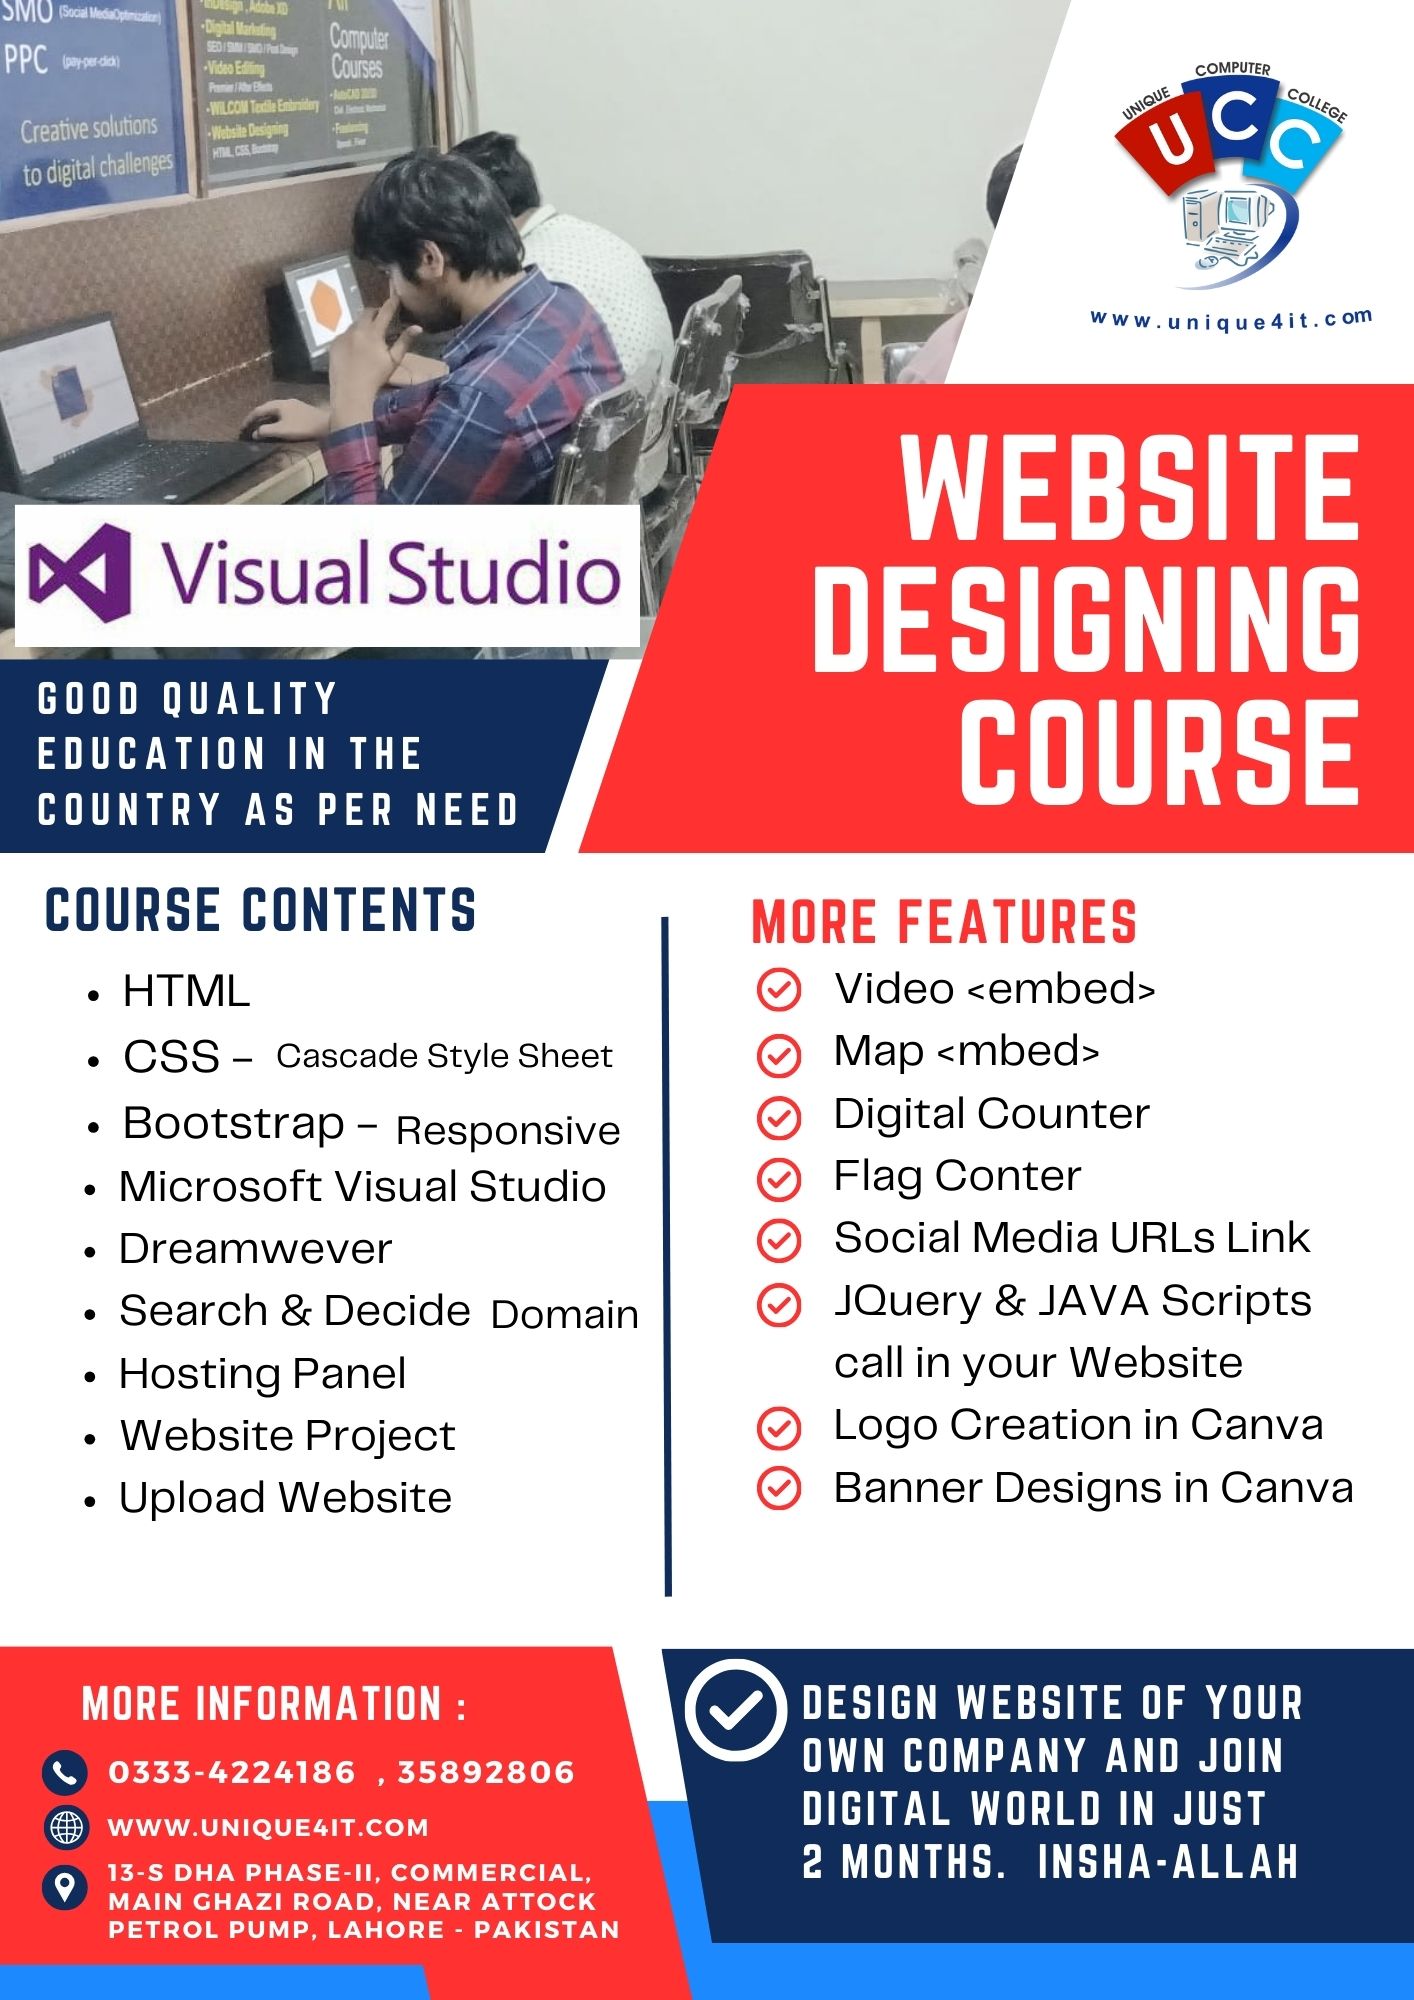 website designing course in lahore - best computer training in dha lahore - unique computer college